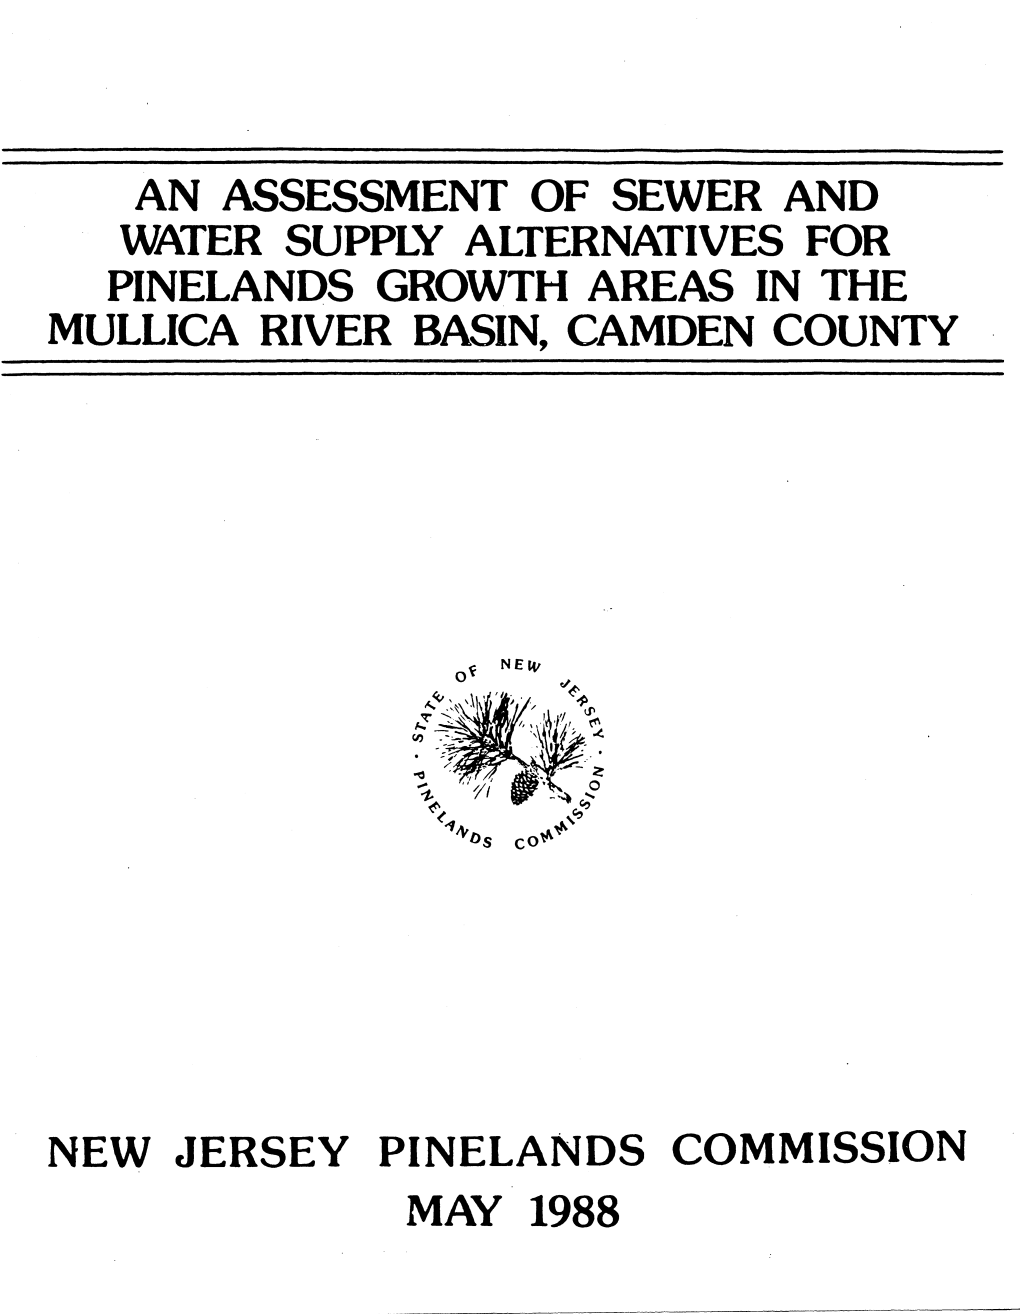 An Assessment of Sewer and Water Supply Alternatives for Pinelands Growth Areas in the Mullica River Basin, Camden County